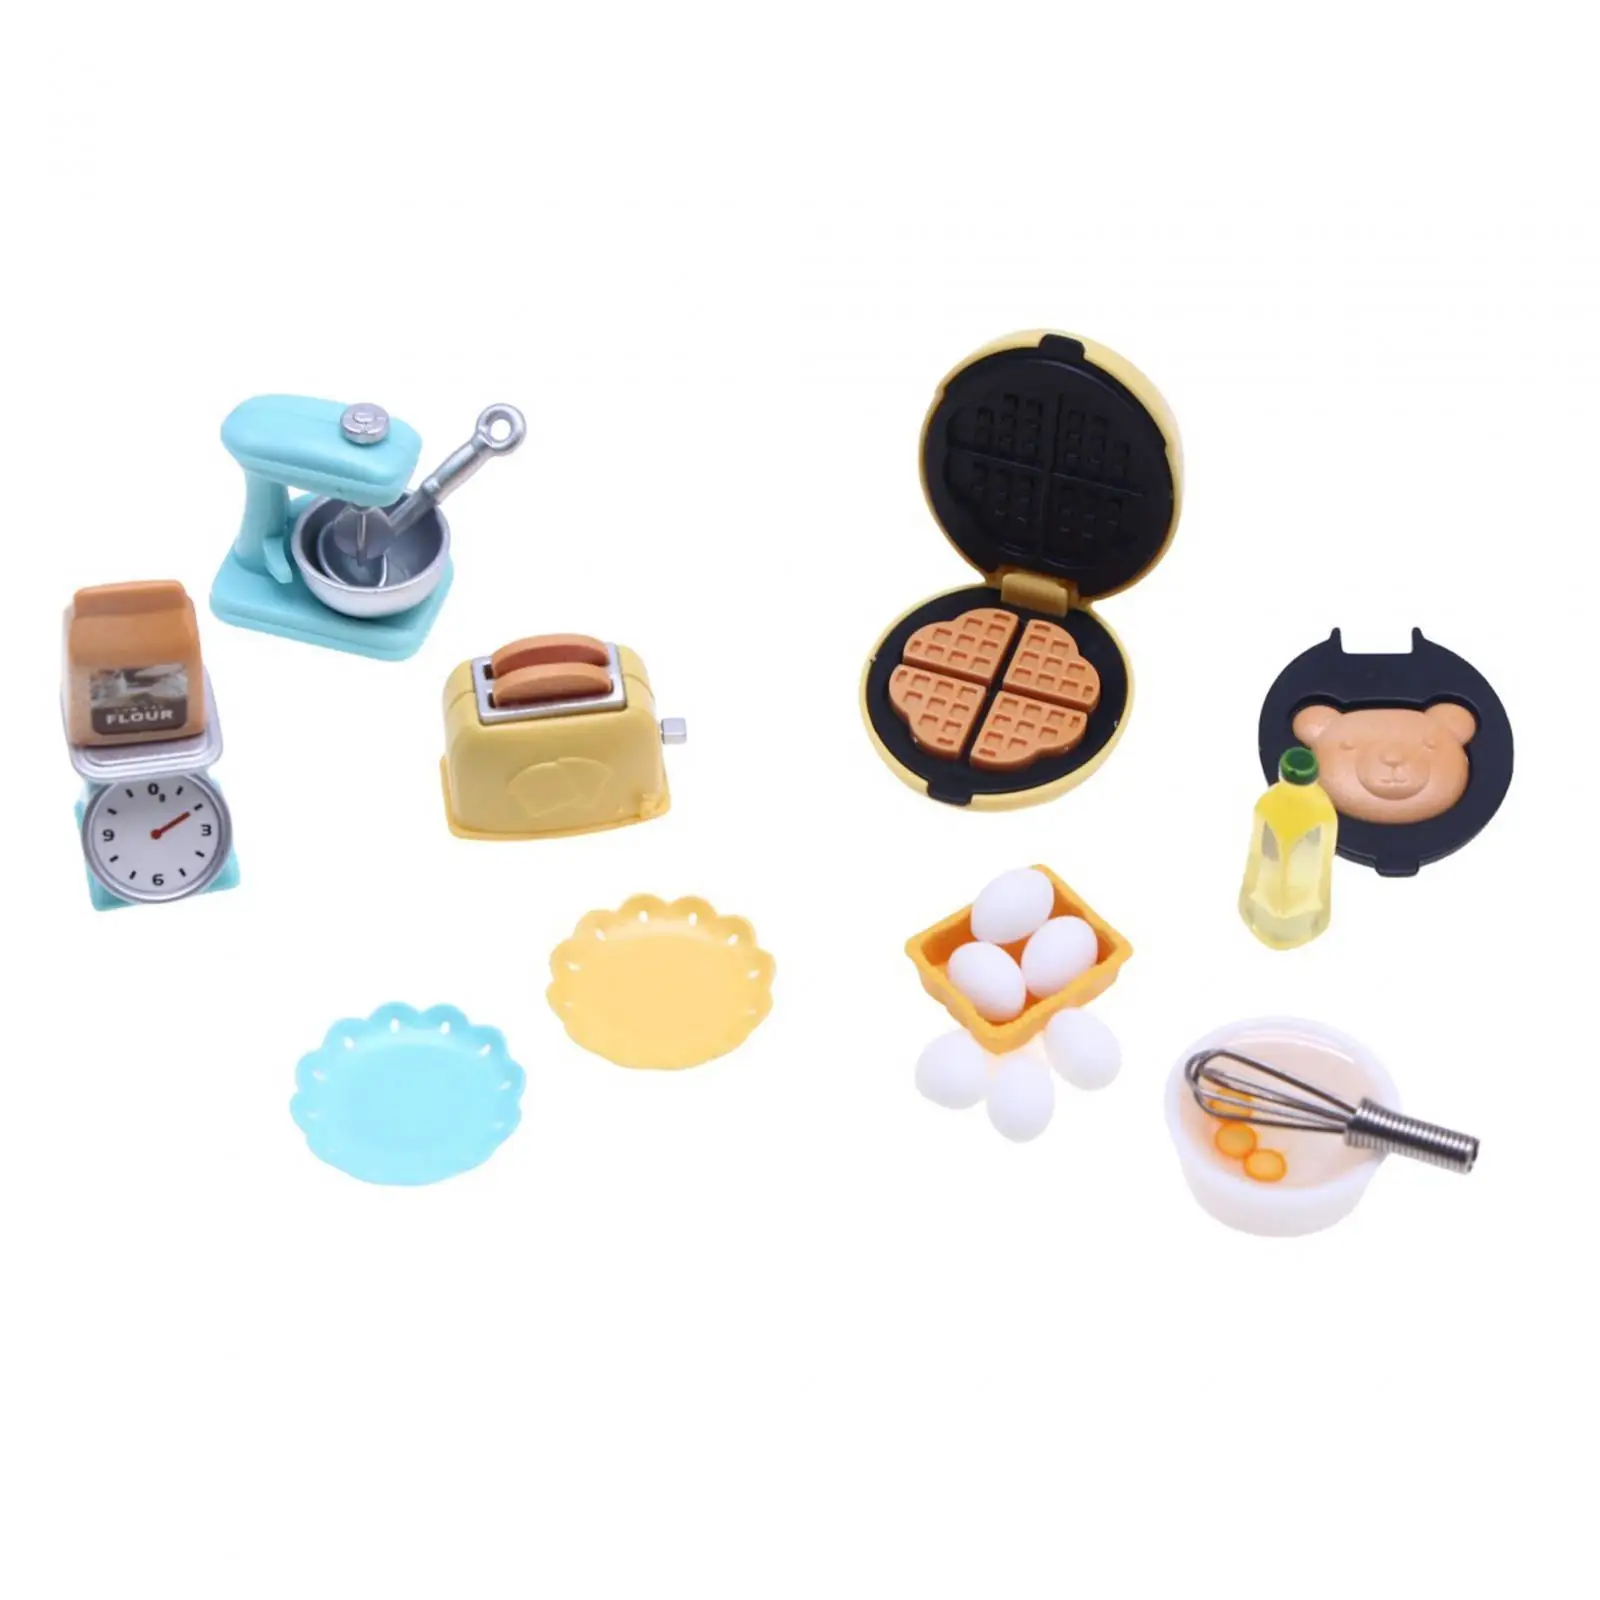 1/12 Miniature Dollhouse Kitchen Set Toasters Kitchen Scale Dollhouse Decor Miniature Furniture Toys for Girls Kids Boys Gifts